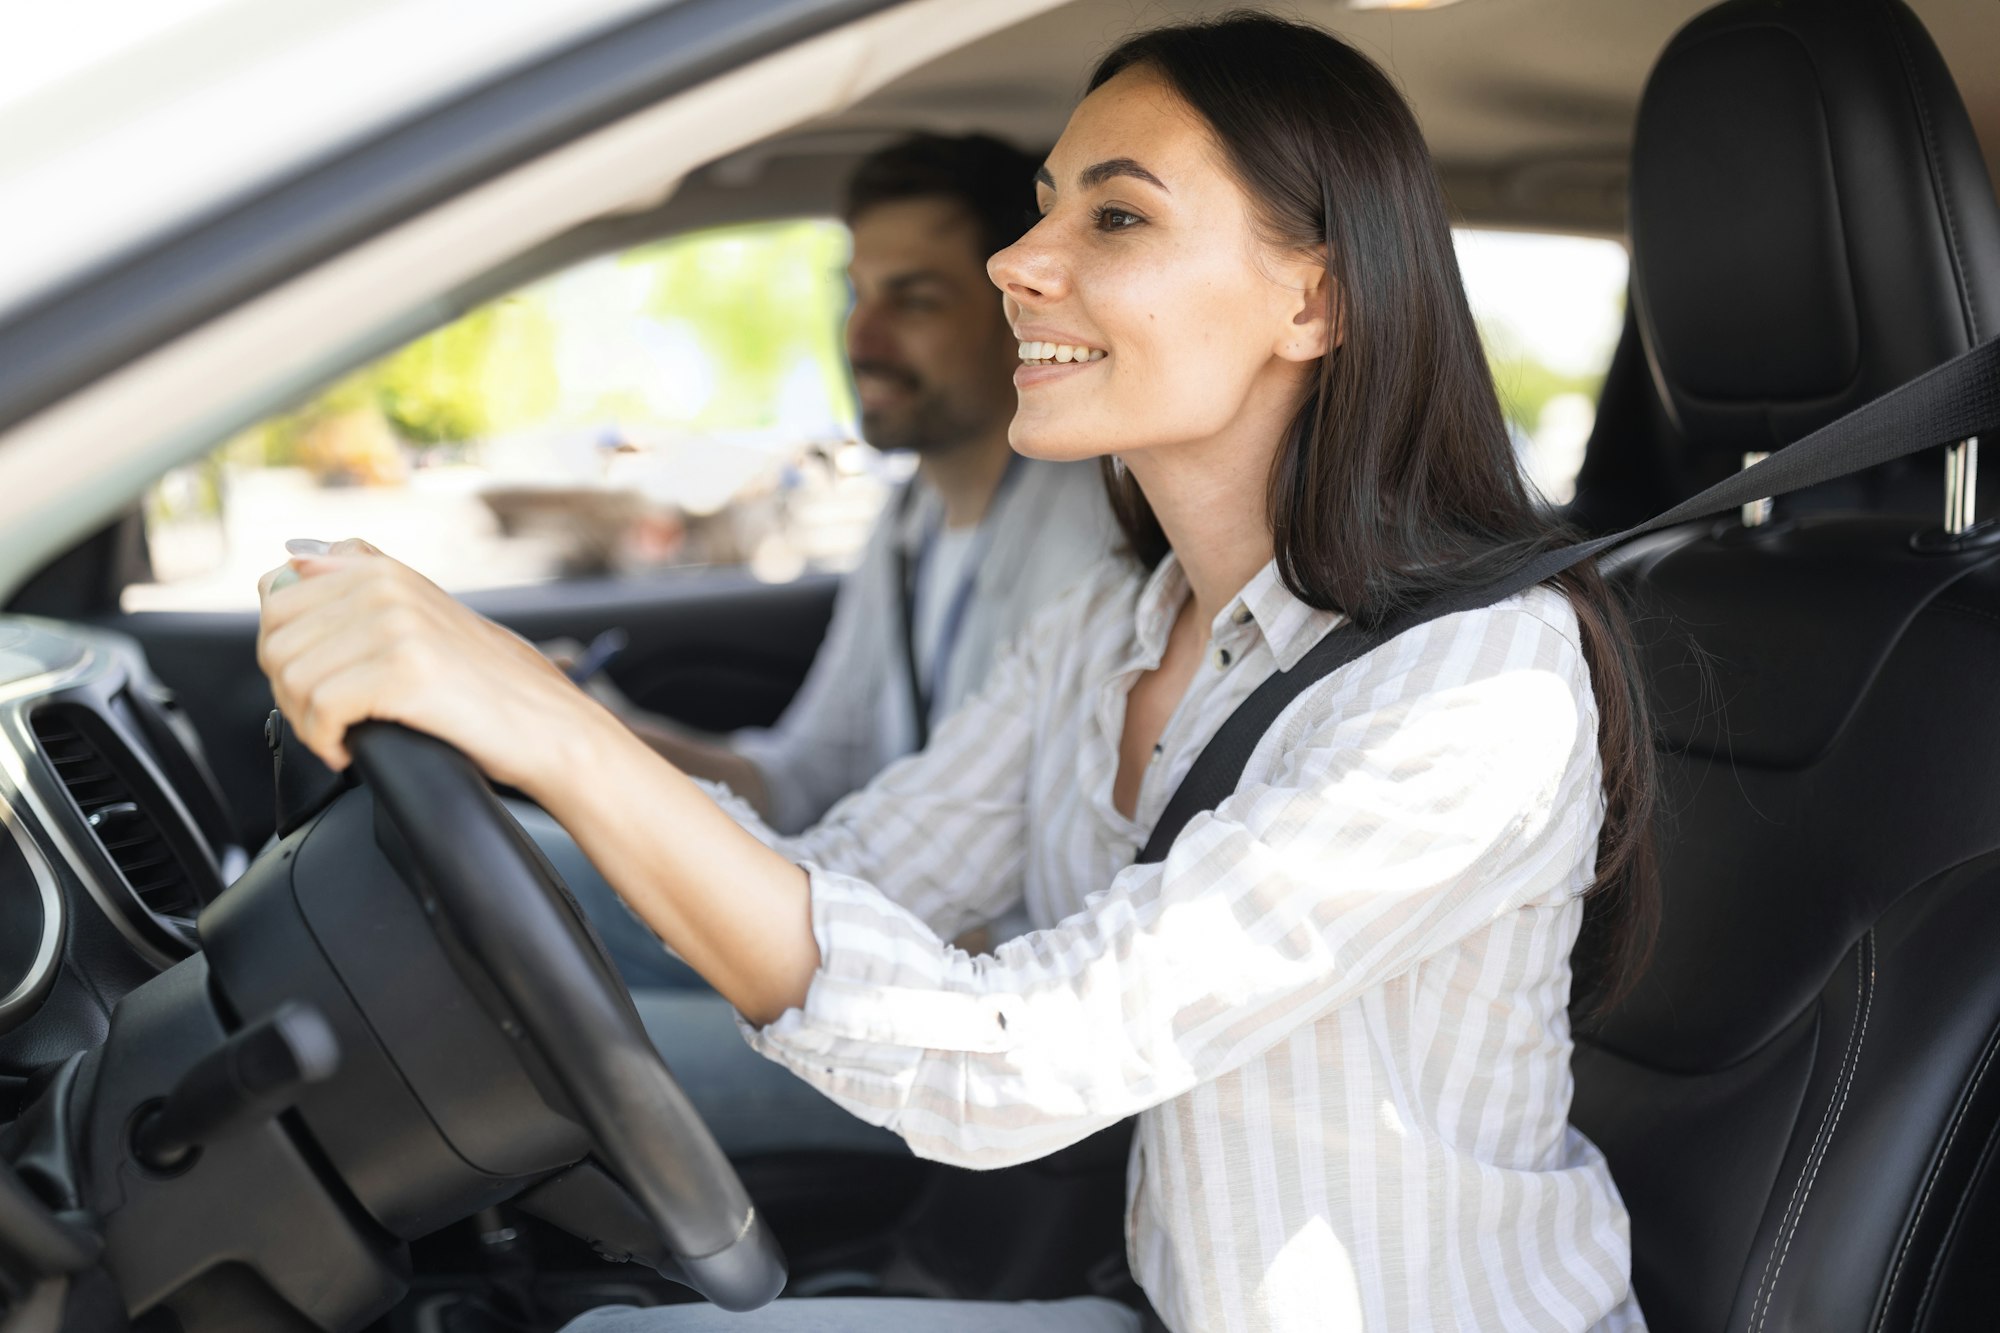 Lady student ready for new lesson with man driving instructor